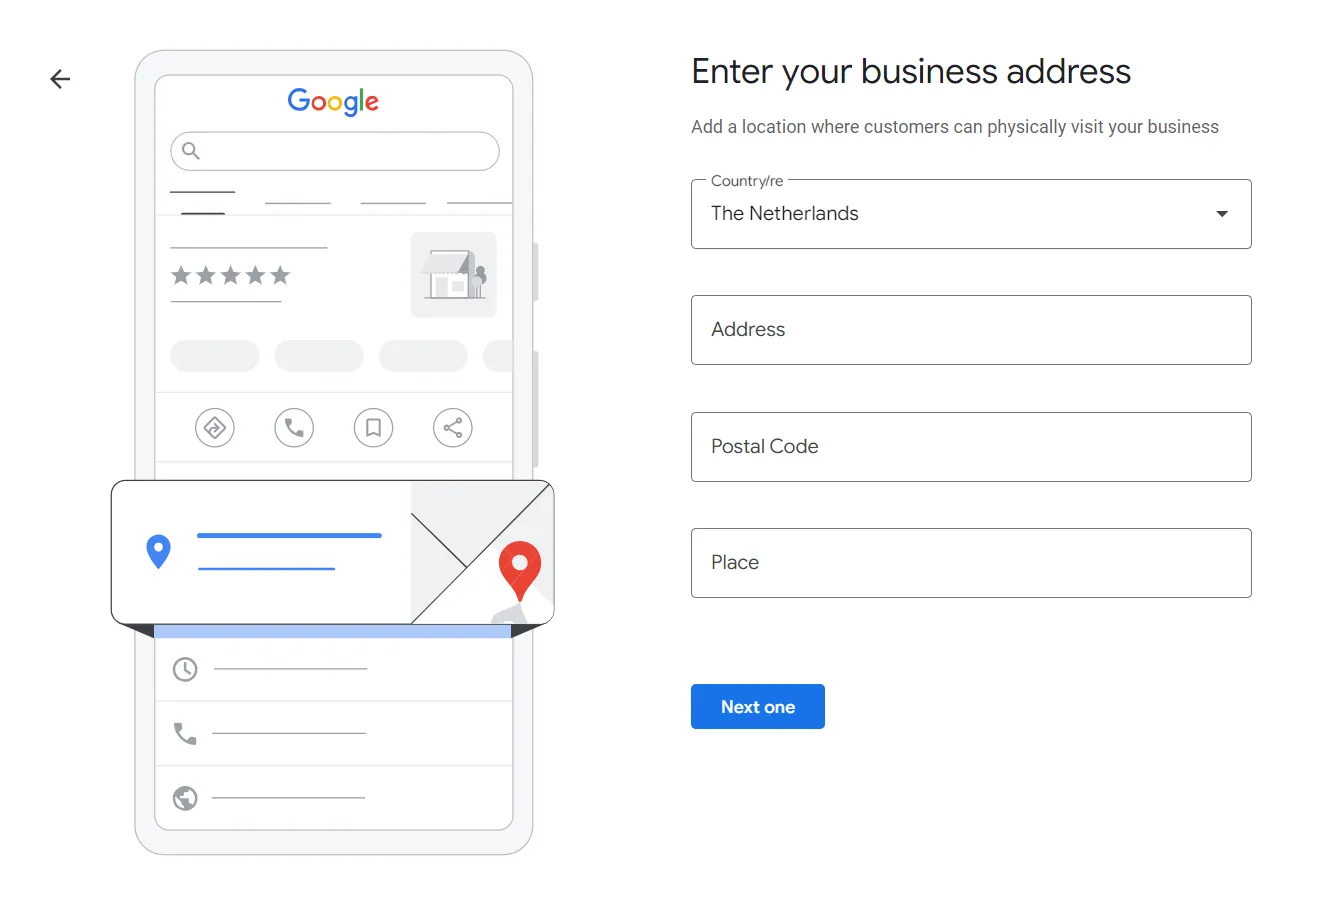 Adding your business address